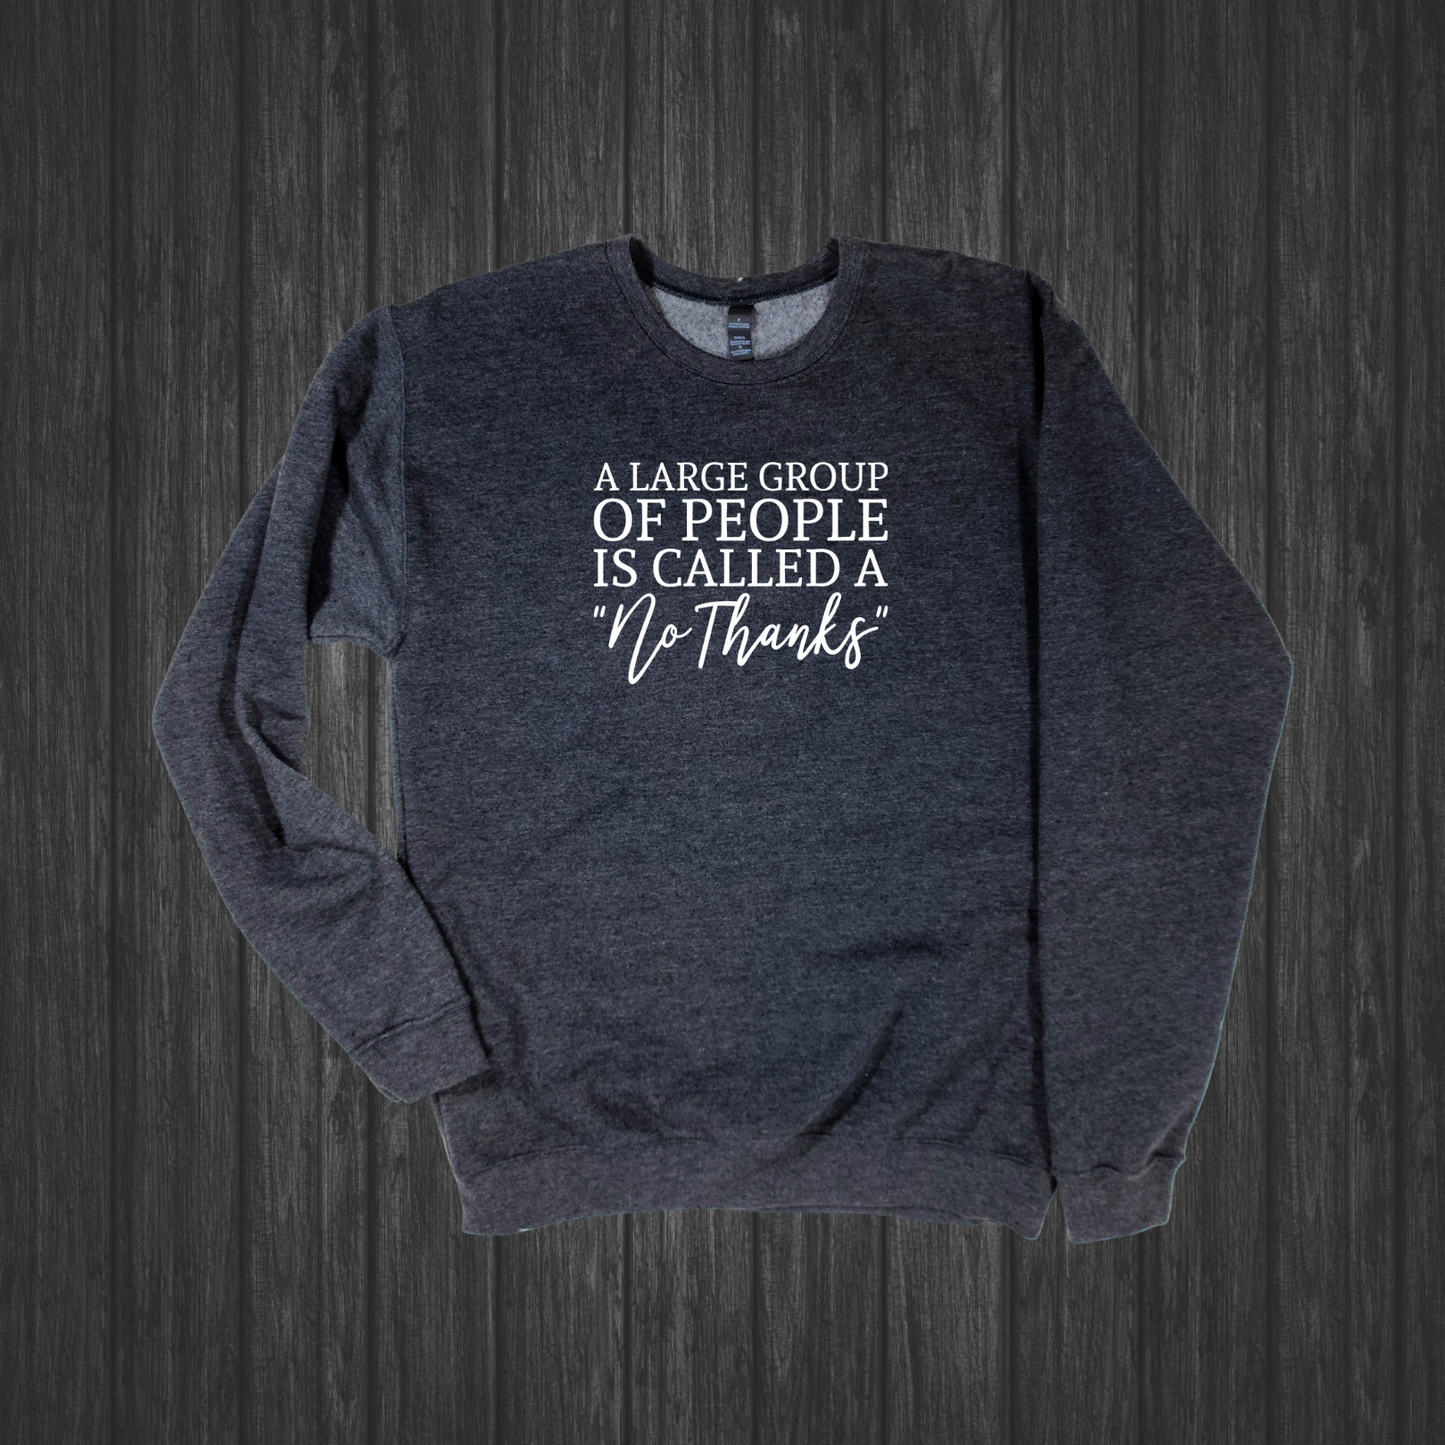 A Large Group of People - Introvert Crewneck Sweatshirt